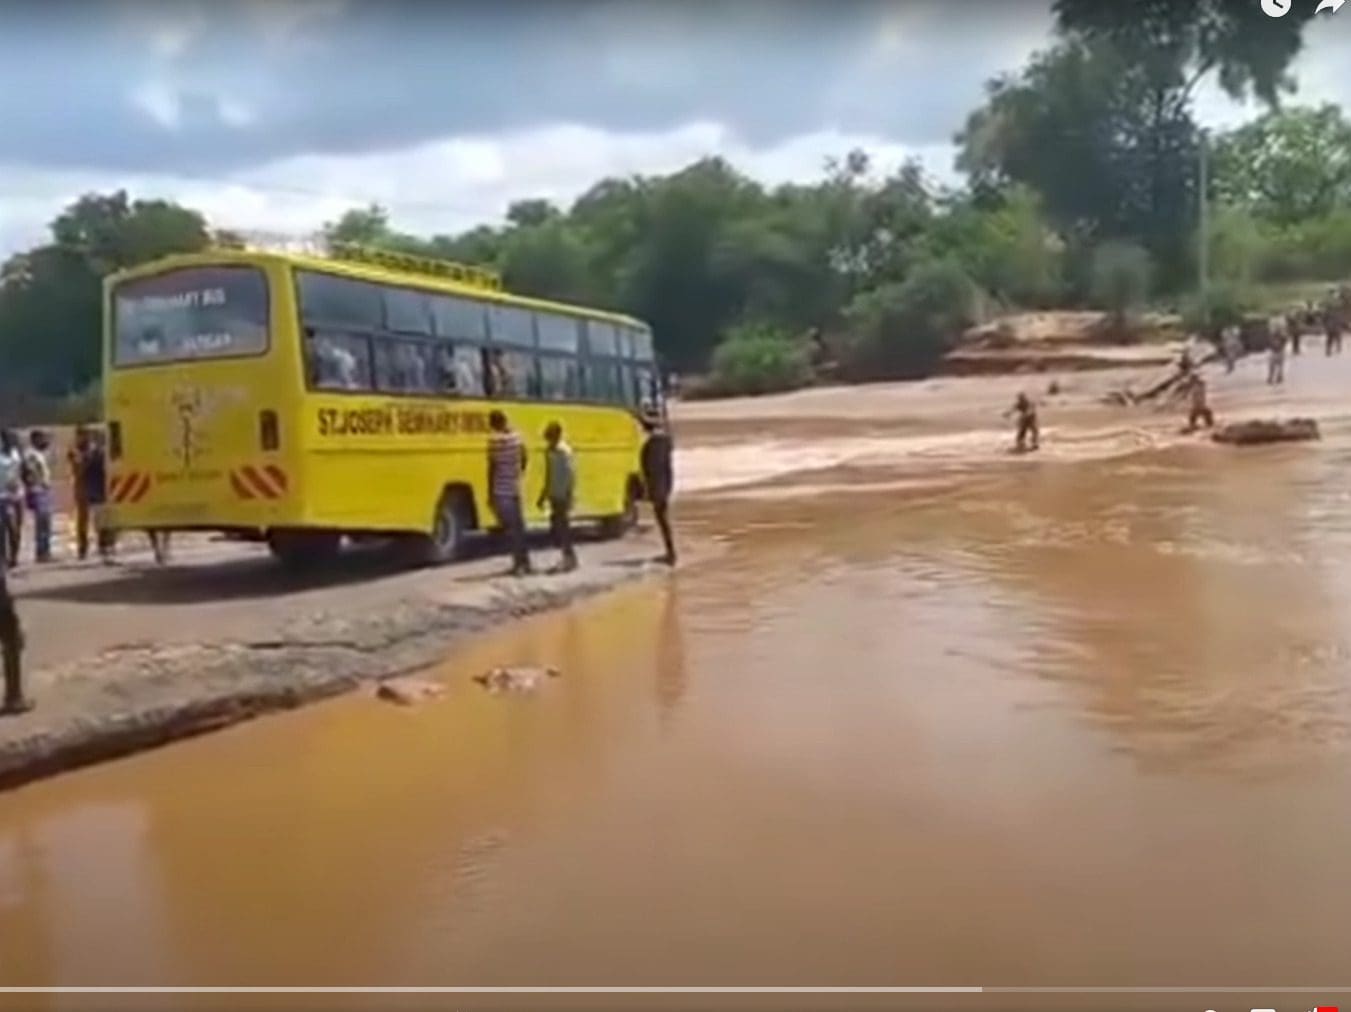 The bus full of people shown seconds before it tipped into the flooded Enziu River. So far, the death toll is at 33, including several children